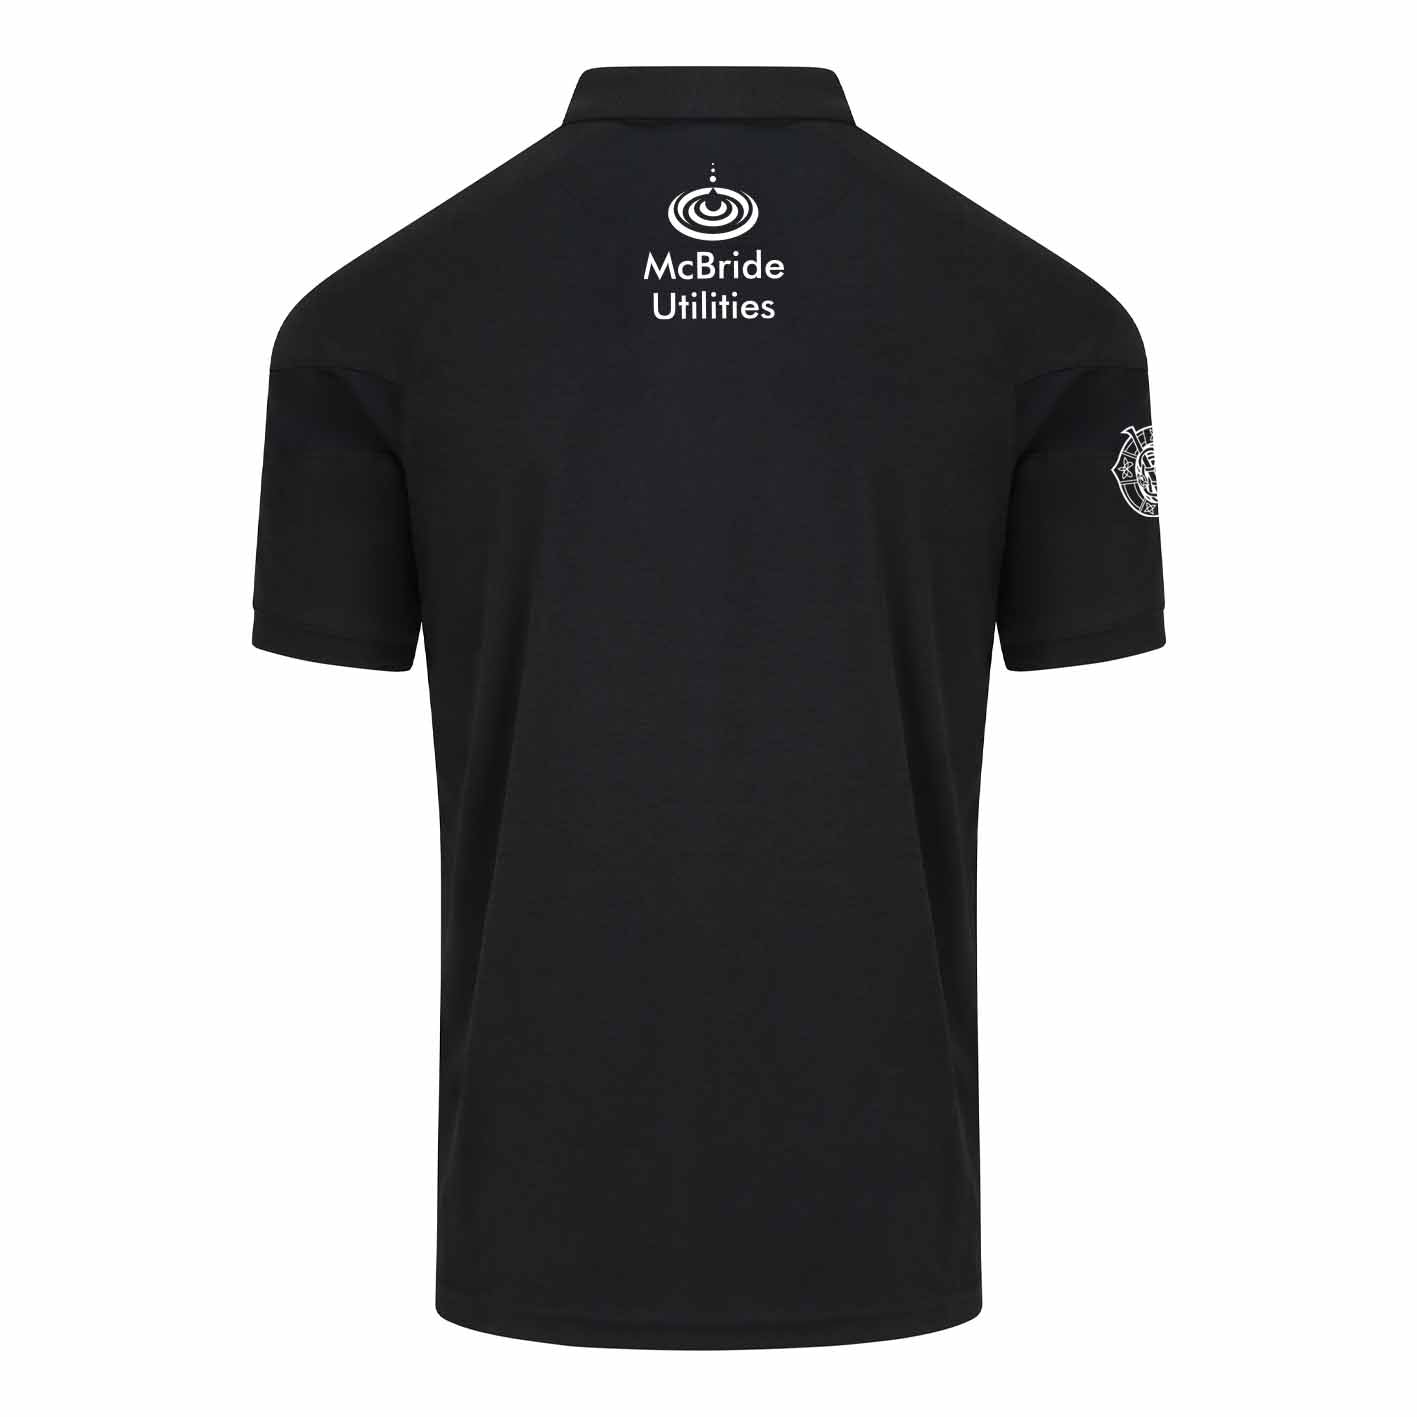 Mc Keever Armagh Camogie Official Core 22 Polo Top - Adult - Black